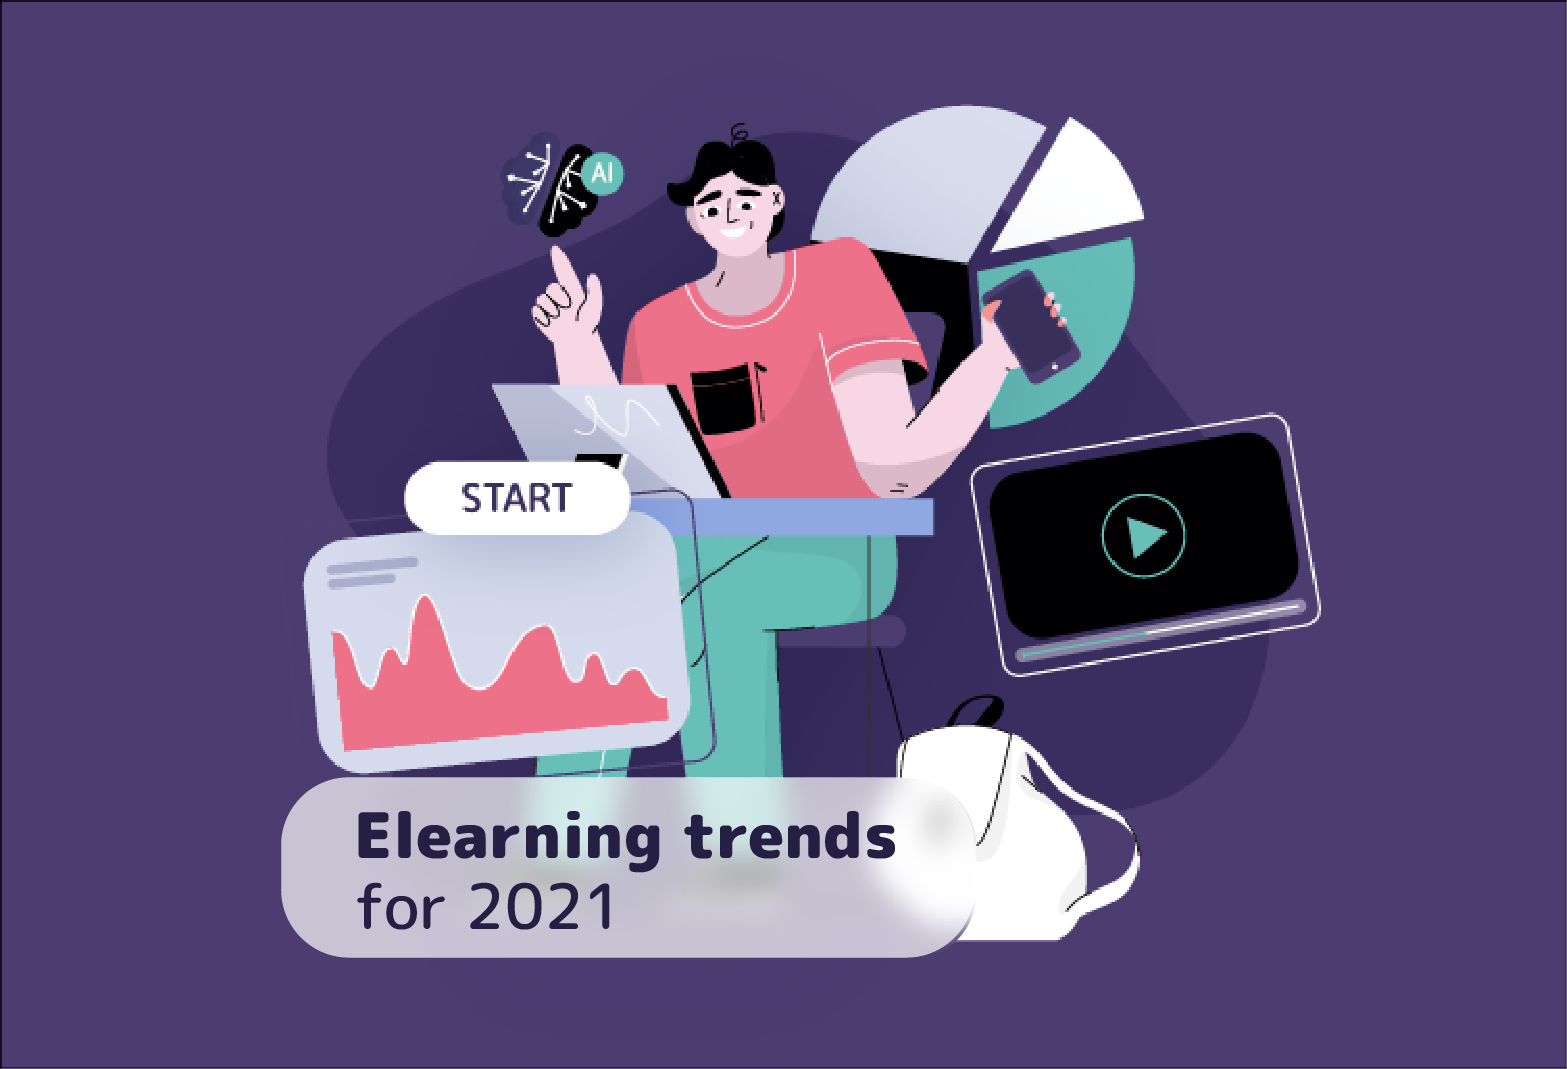 Elearning trends for 2021 you should focus on